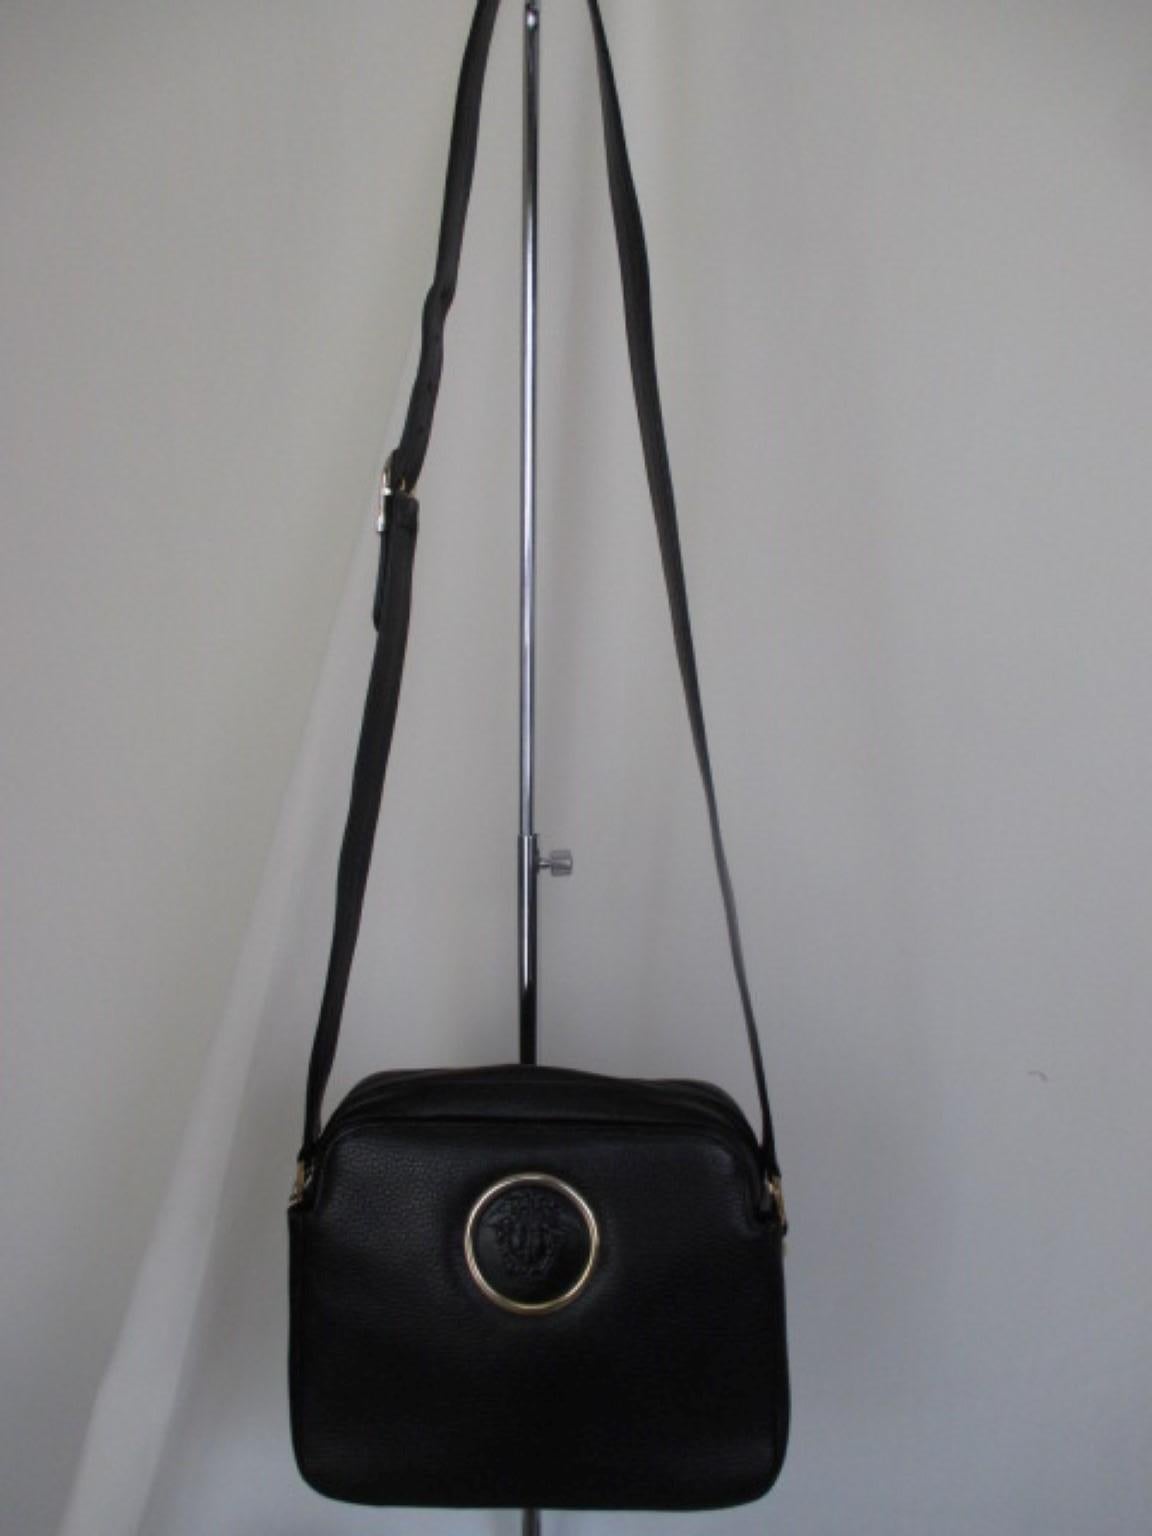 This Versace bag is made with gold hardware.
Color: black
Pre-loved condition
Can be worn as cross body bag
Inside with a zipper pocket and an extra side pocket.
Sizes:  23 cm/9.05 inch x 19 cm/ 7.48 inch x 9 cm/3.54 inch 

Please note that vintage